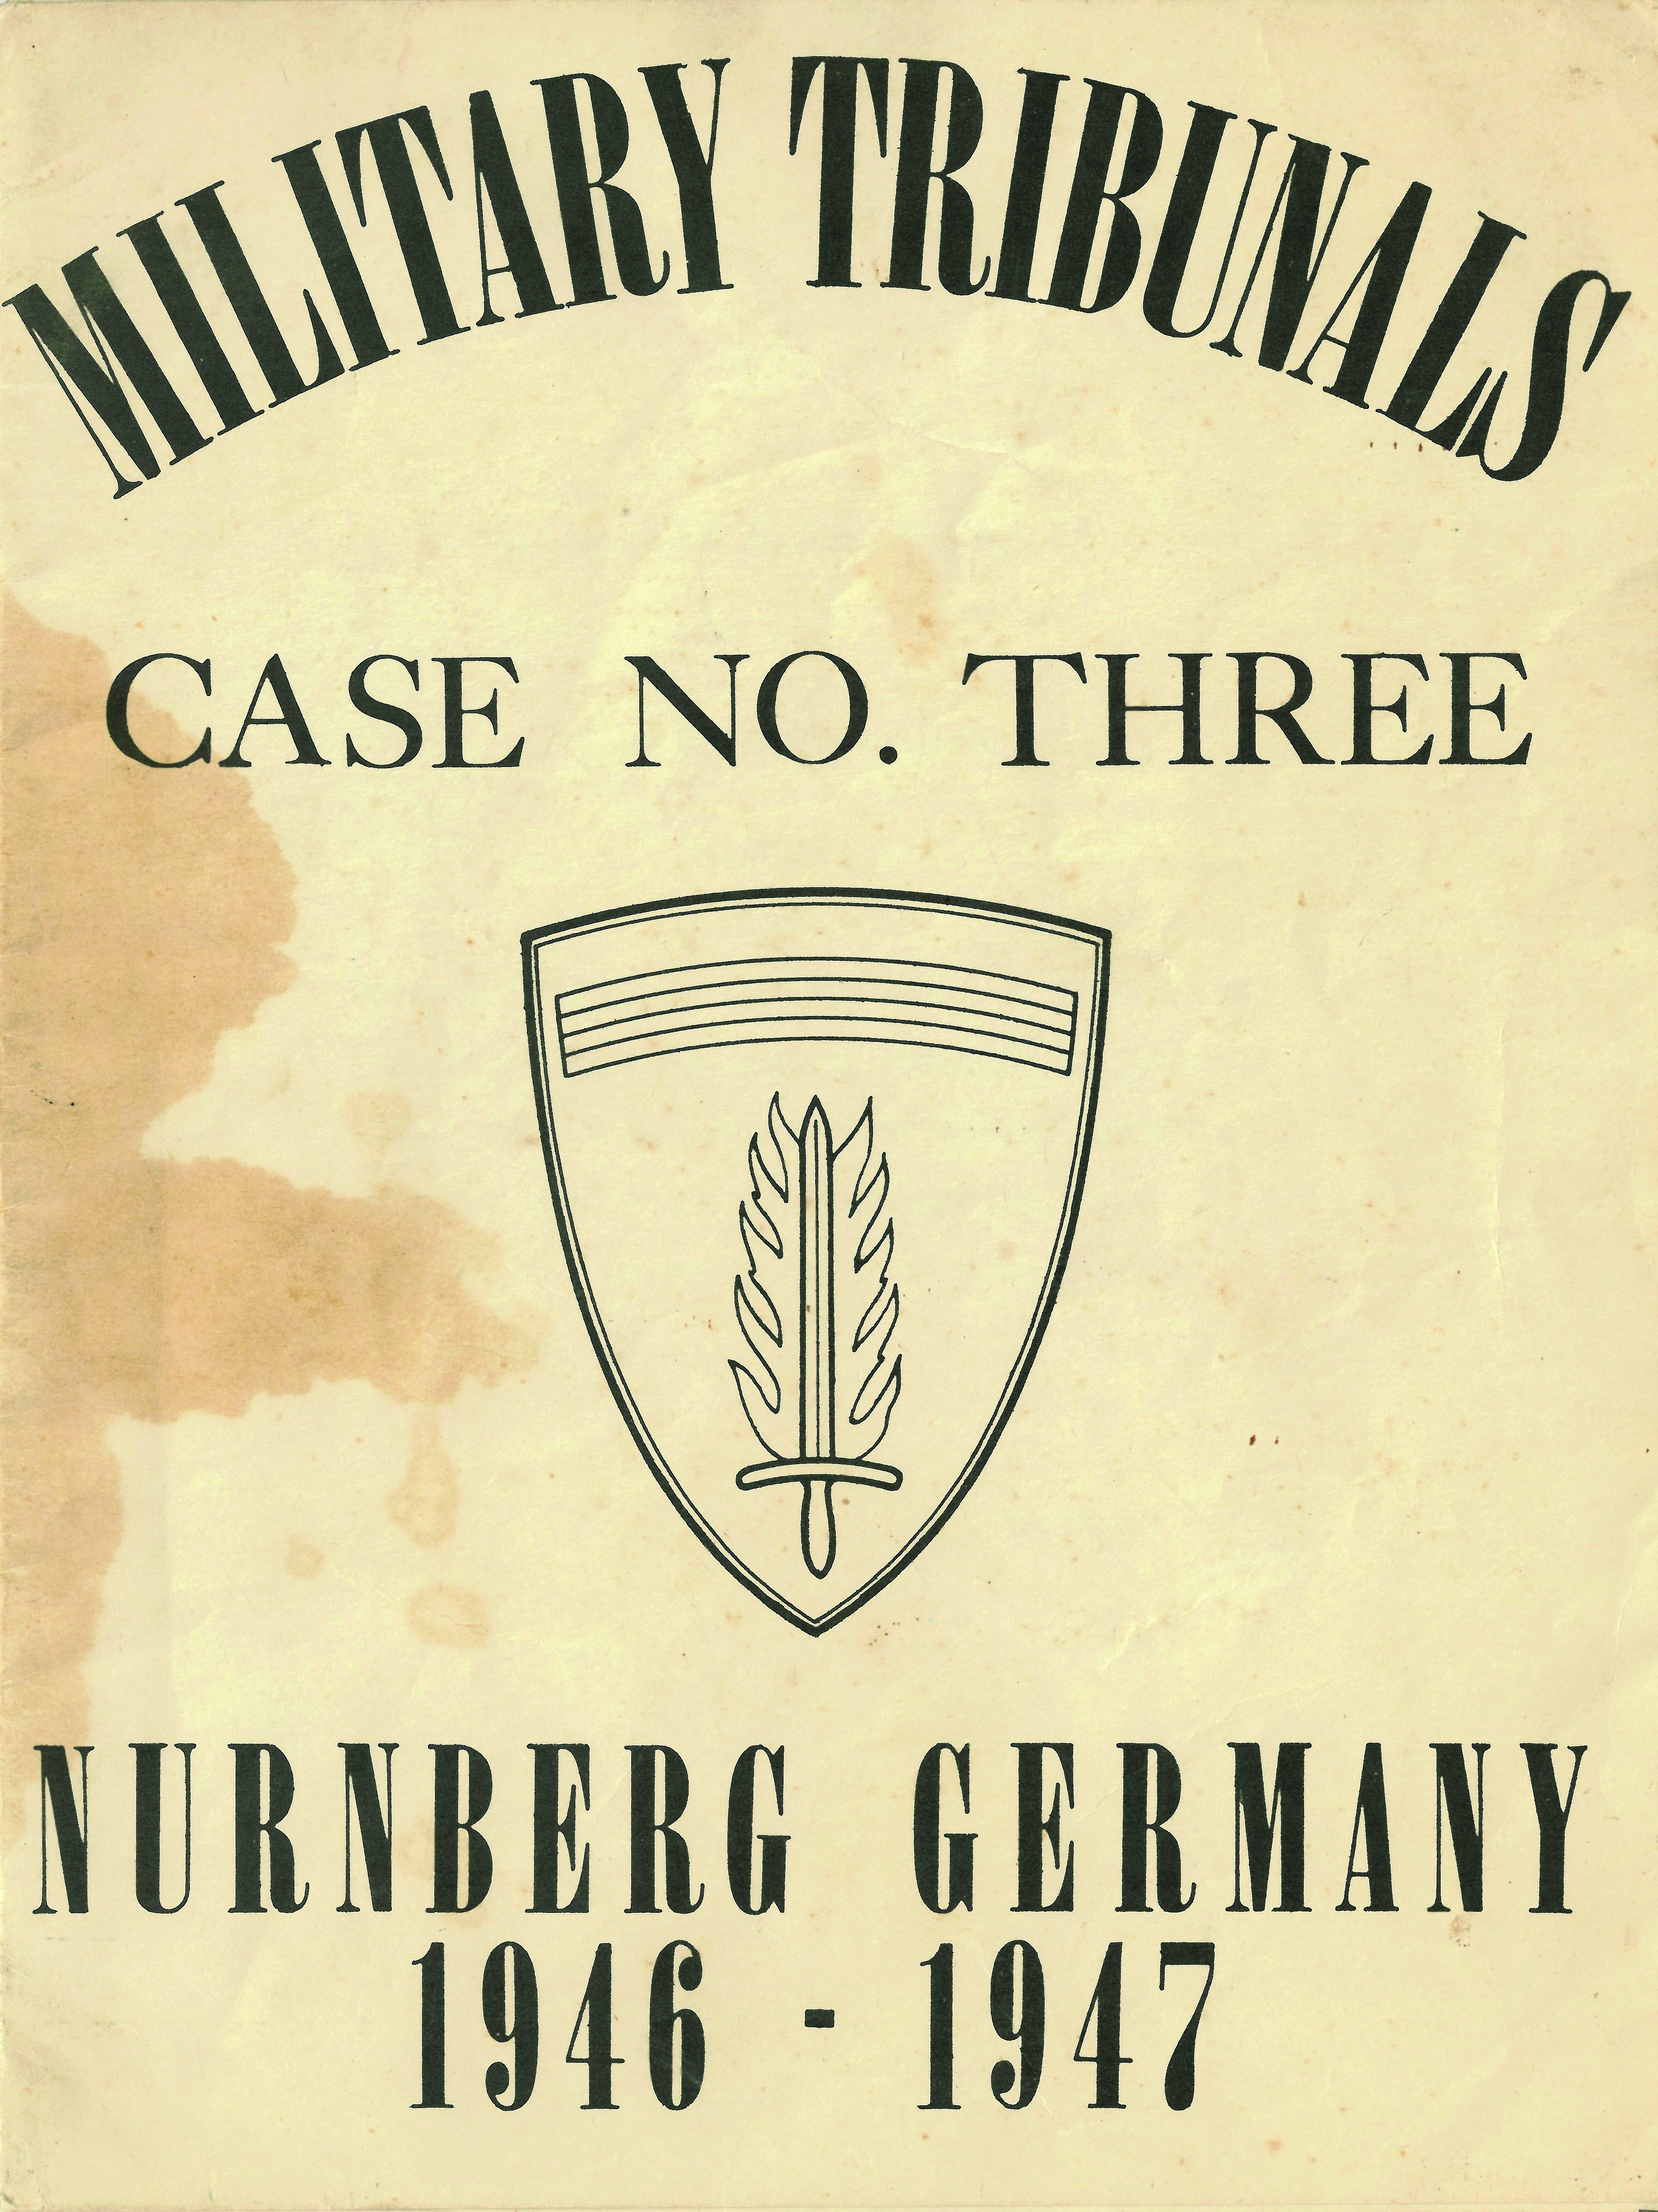 The cover of the program for the Military Tribunals, Case No. 3. (Photo courtesy of Fred Borch III)